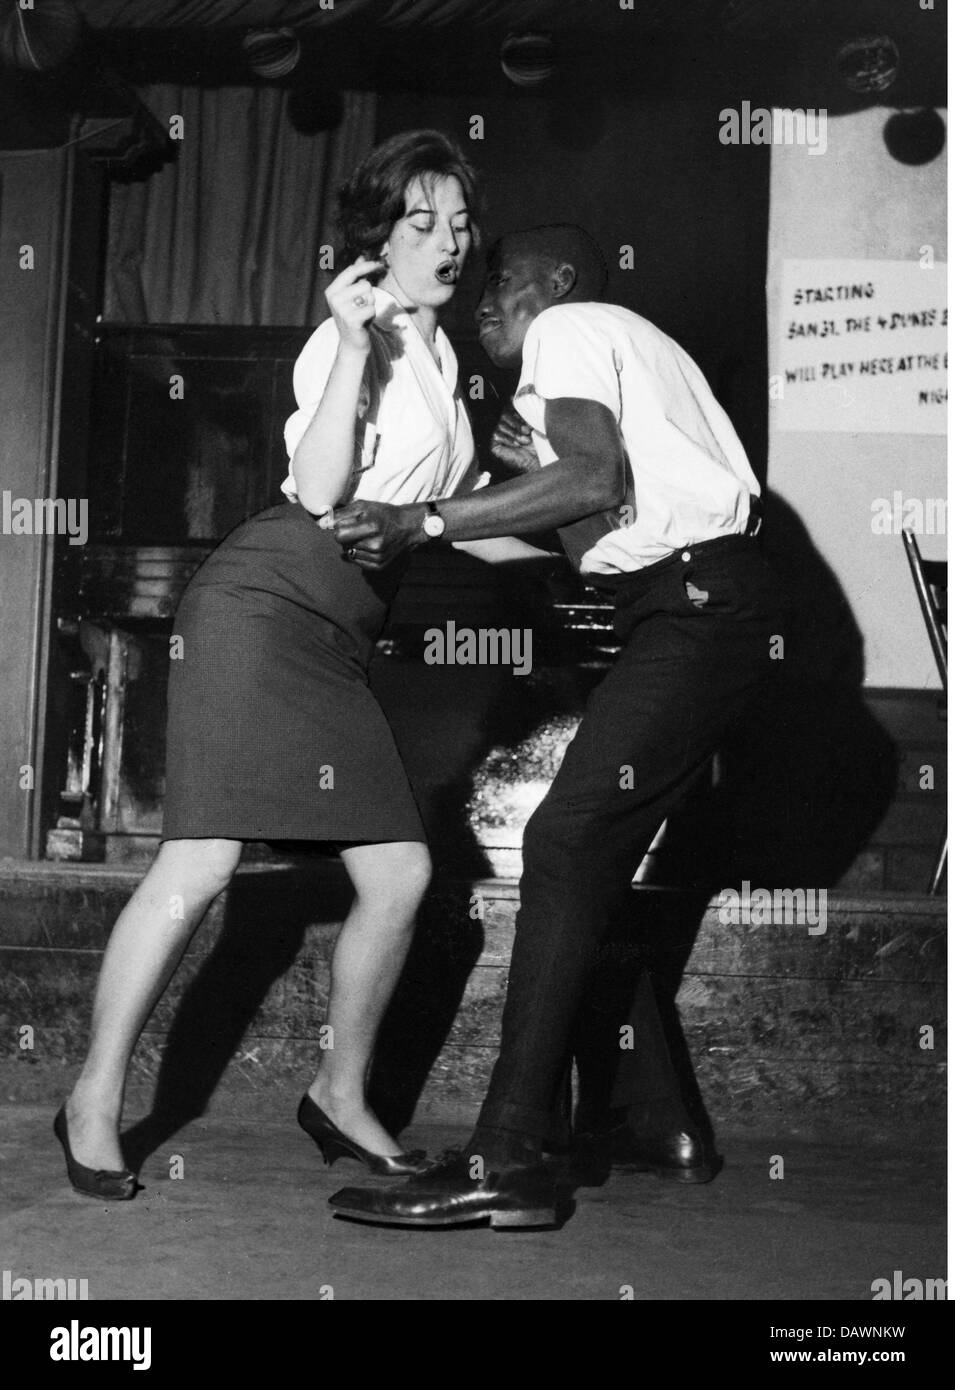 post war period, the occupying forces, German woman dancing with African-American GI, Birdland Club, Munich, Germany, late January 1961, Additional-Rights-Clearences-Not Available Stock Photo